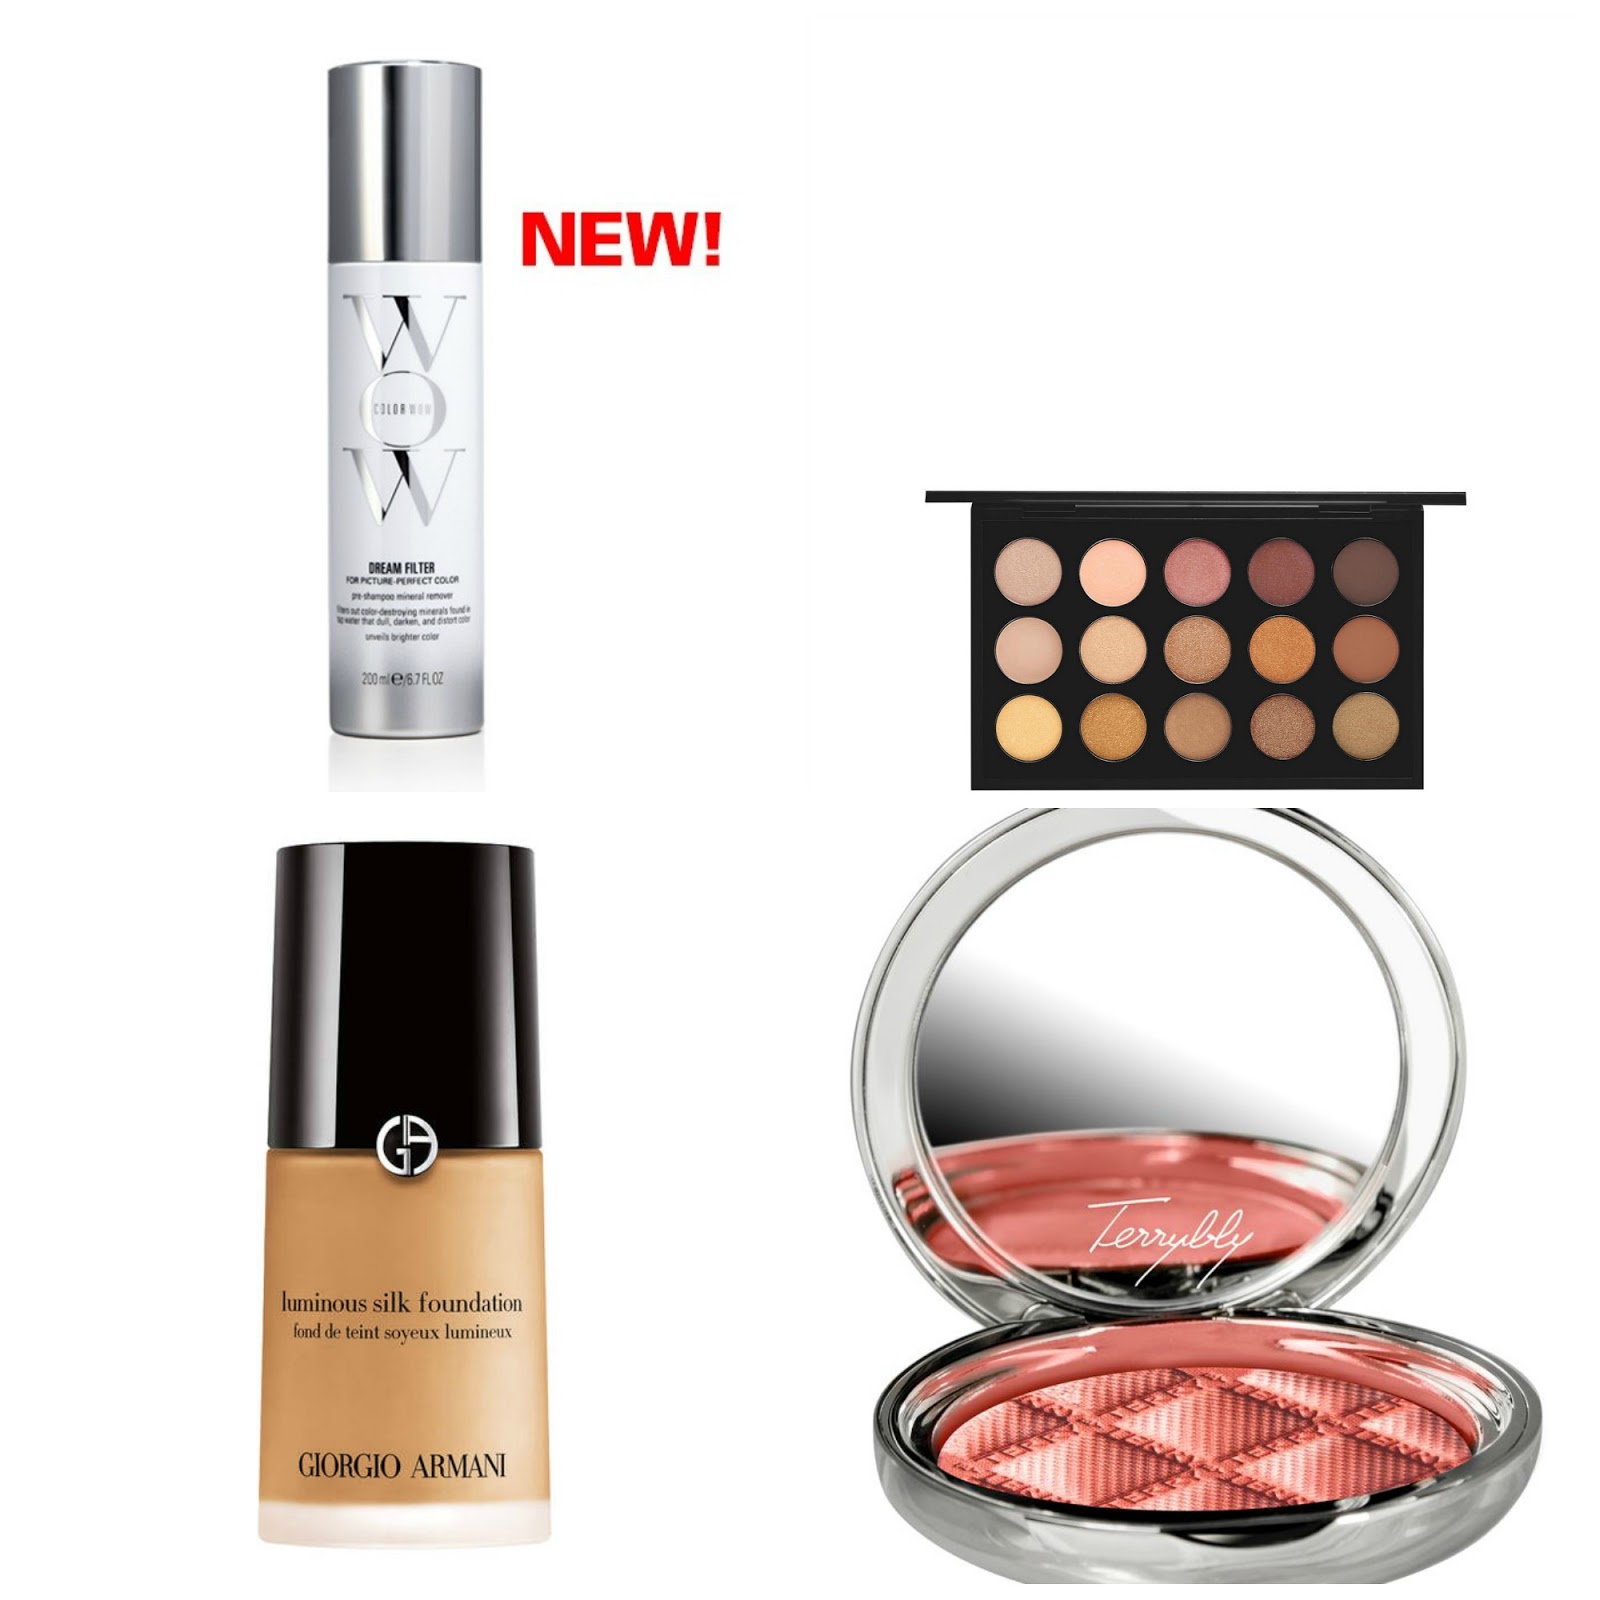 The best beauty deals online at the moment!